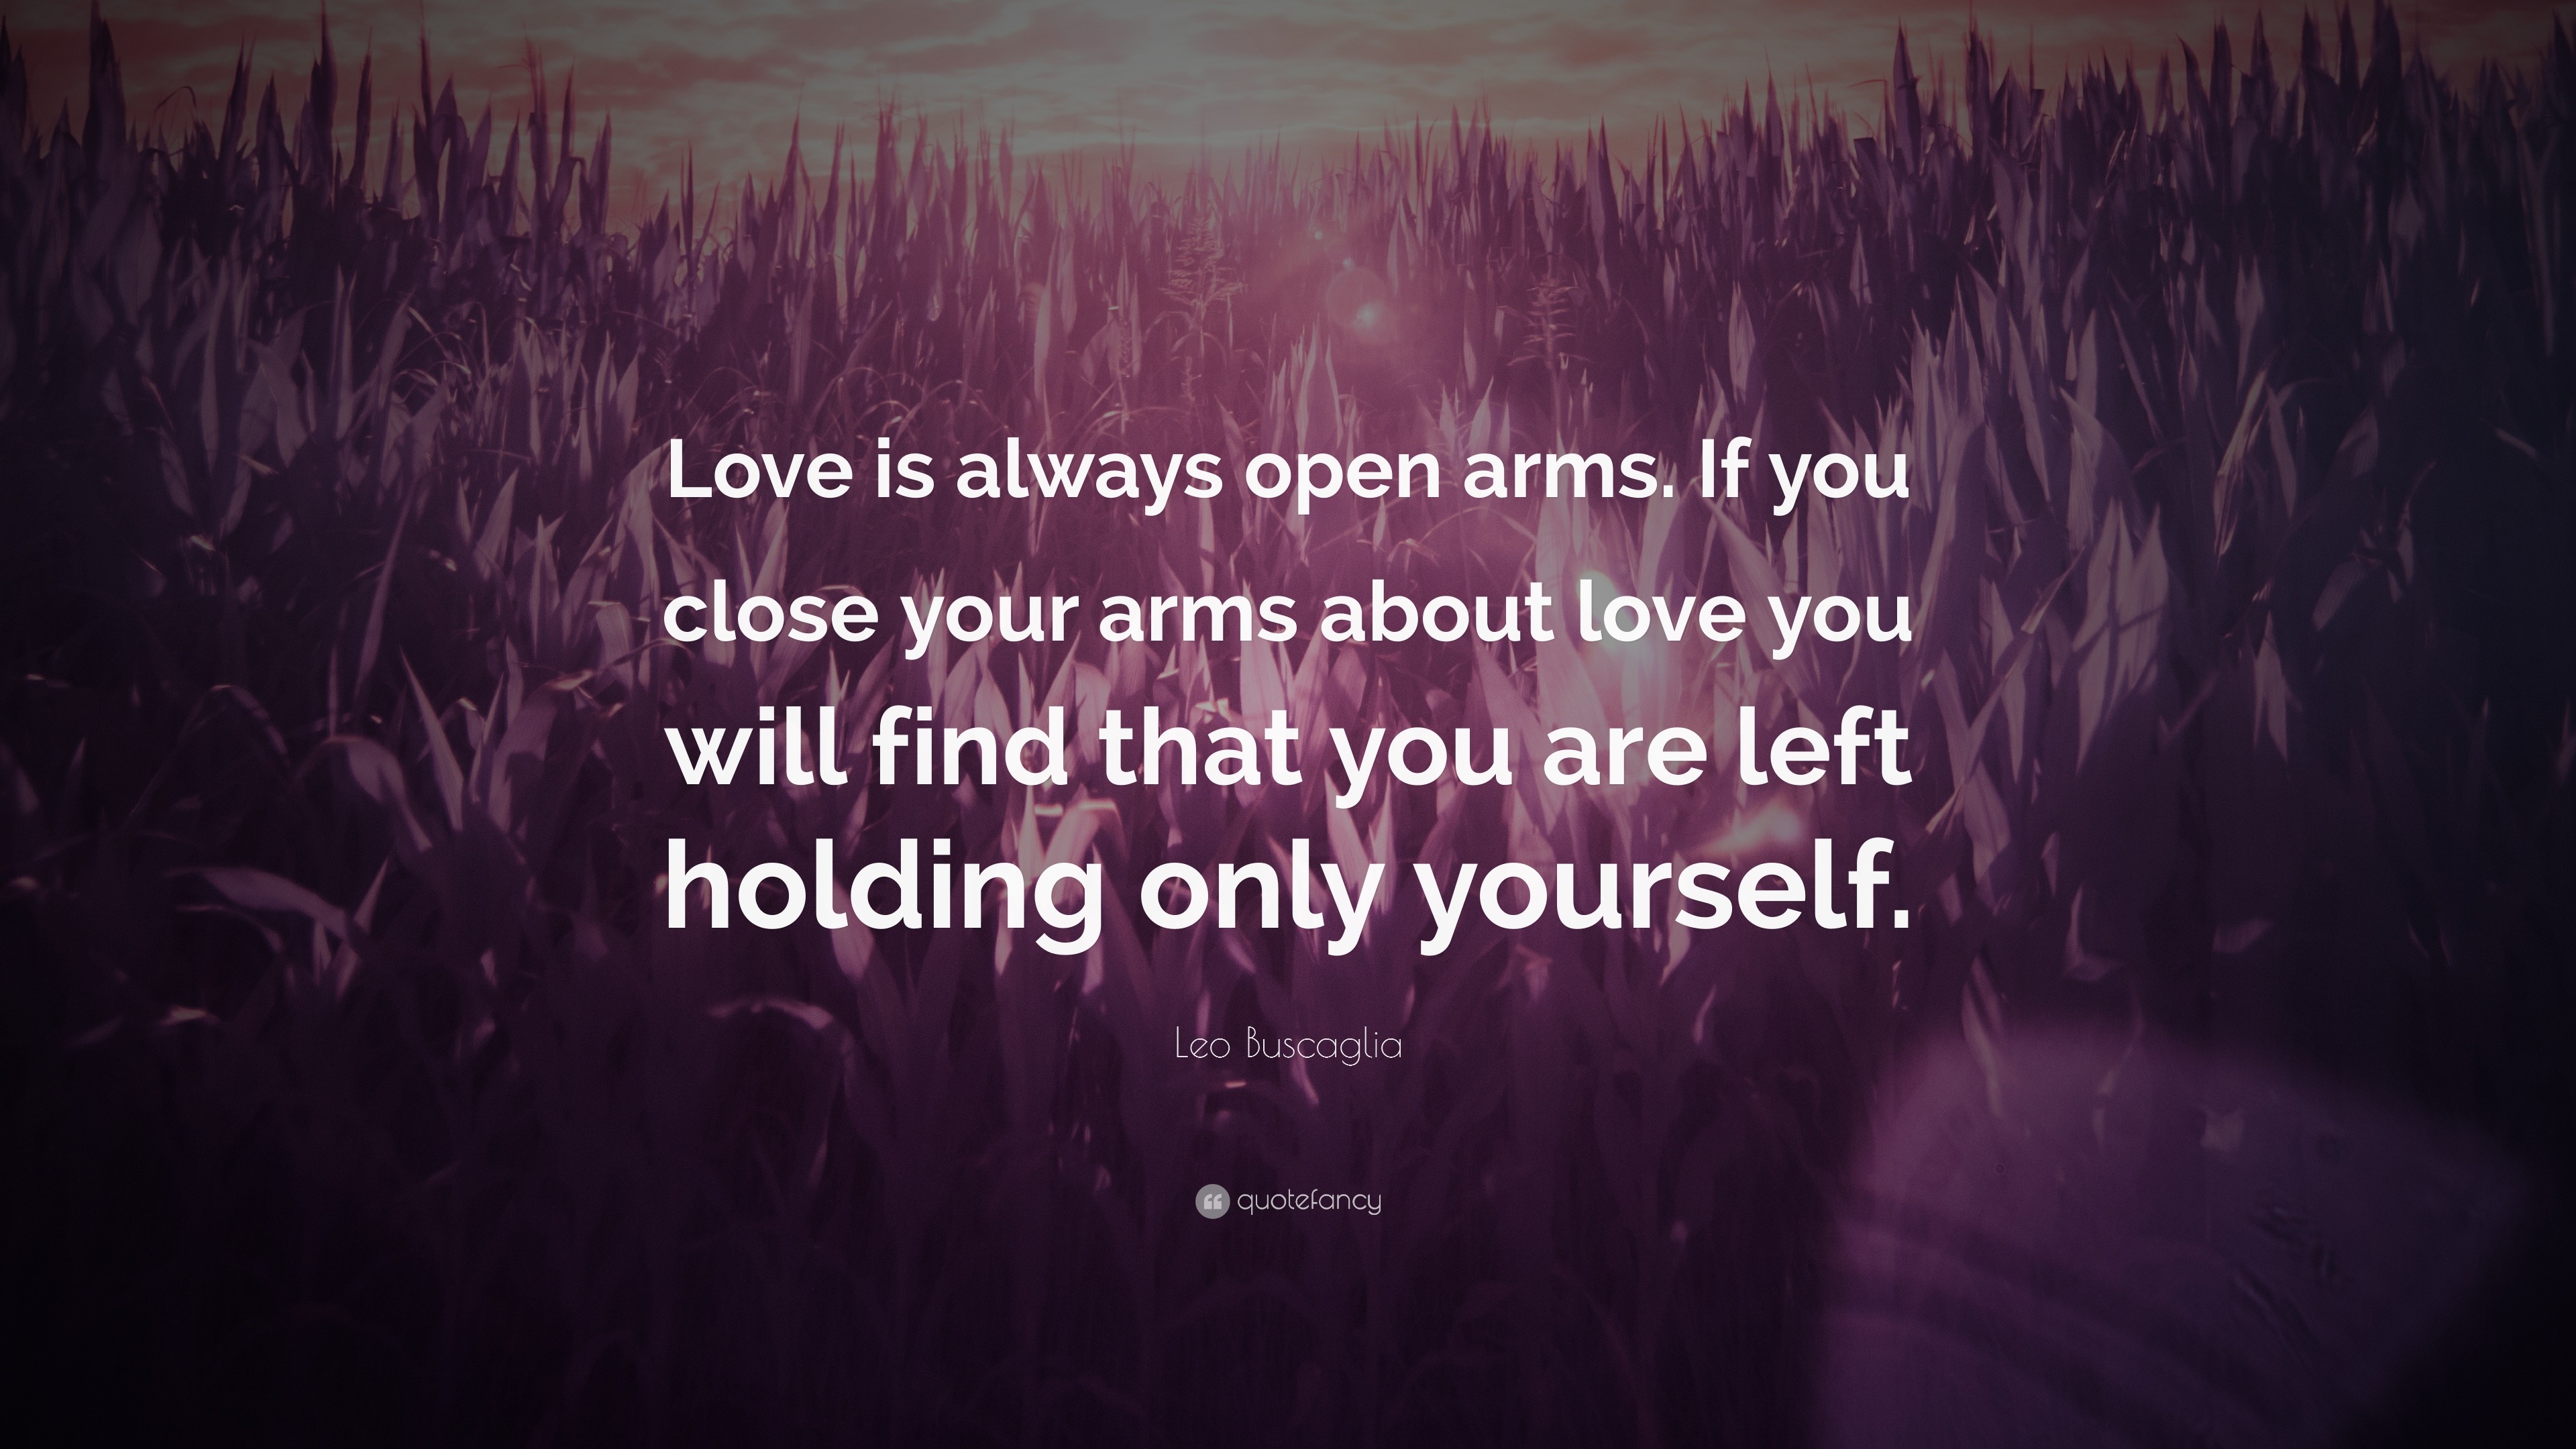 Leo Buscaglia Quote “Love is always open arms If you close your arms